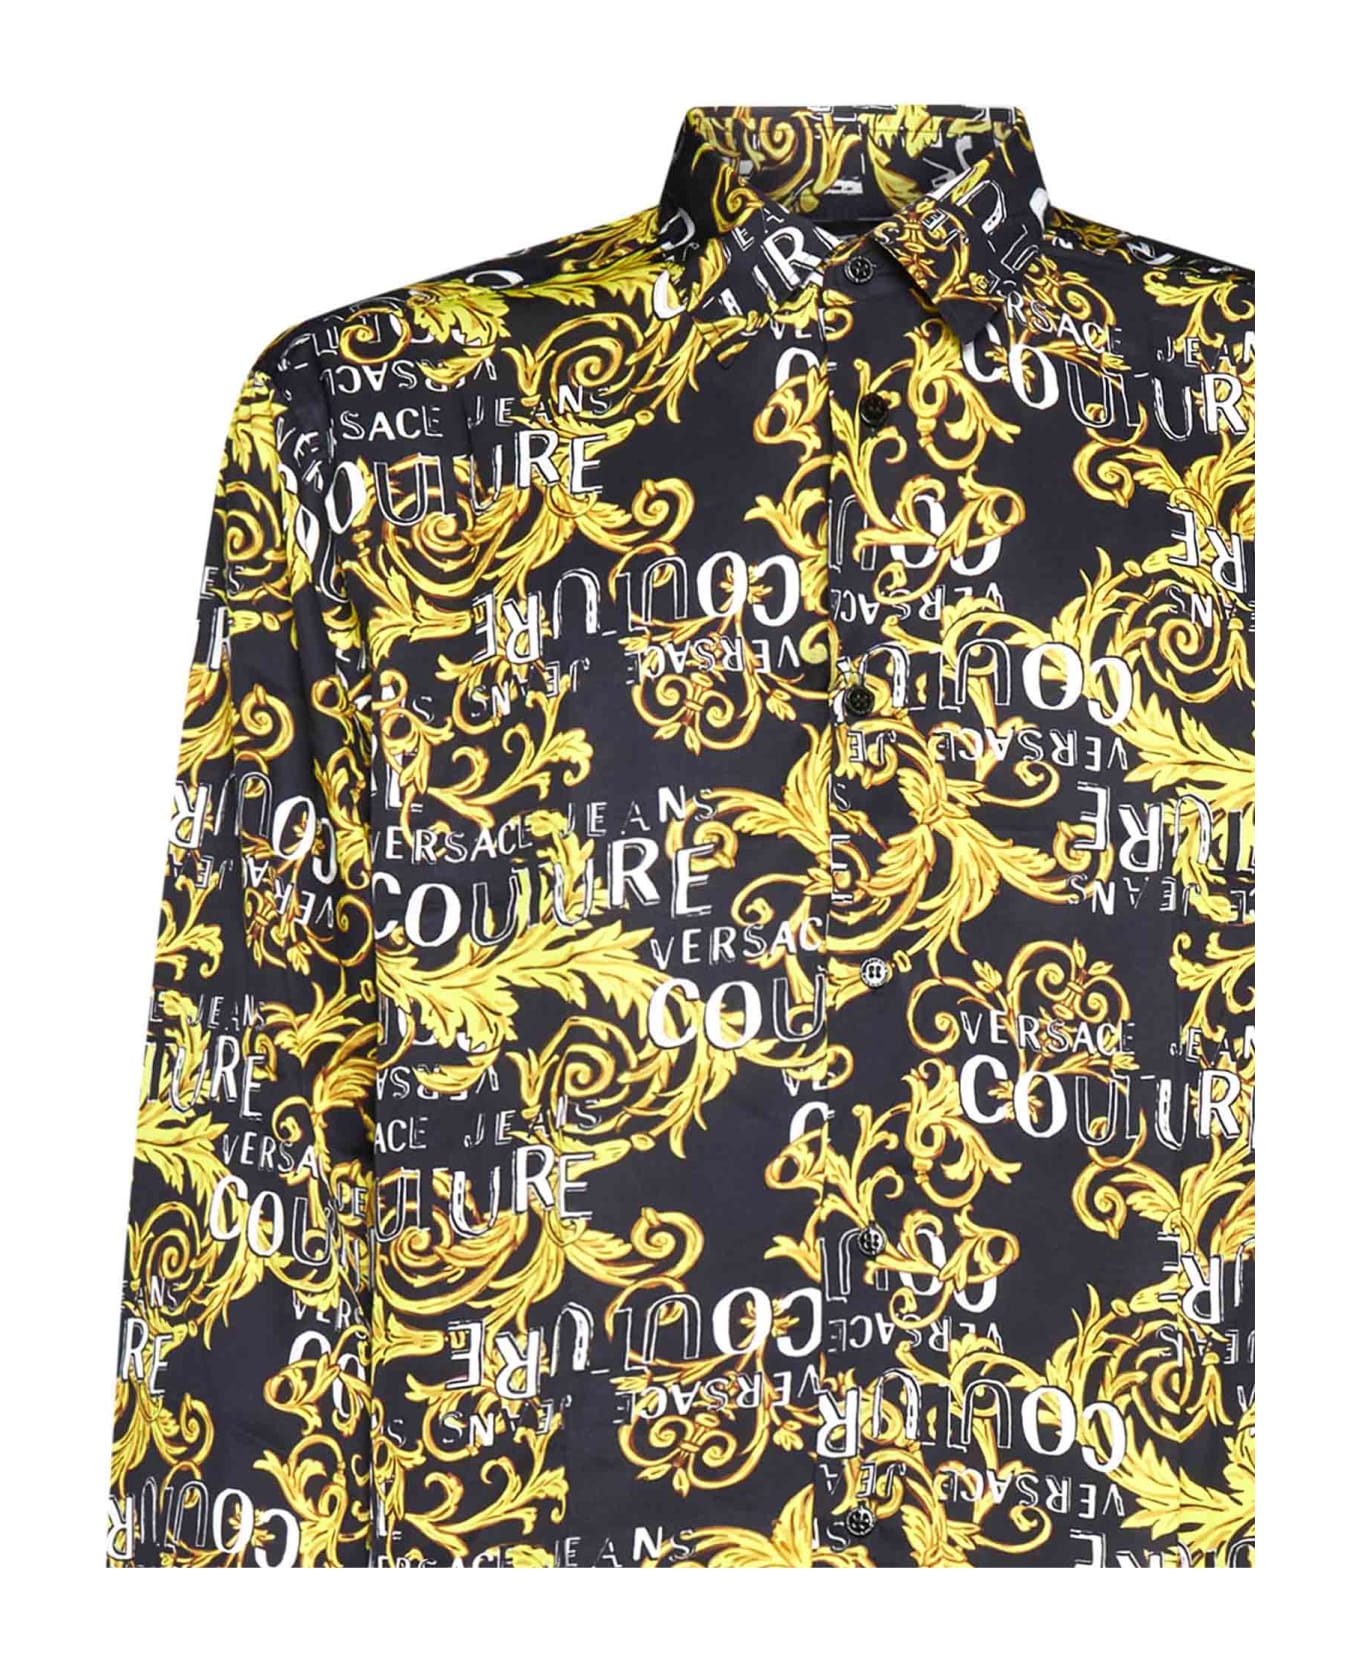 Versace Jeans Couture Shirt - Black gold シャツ